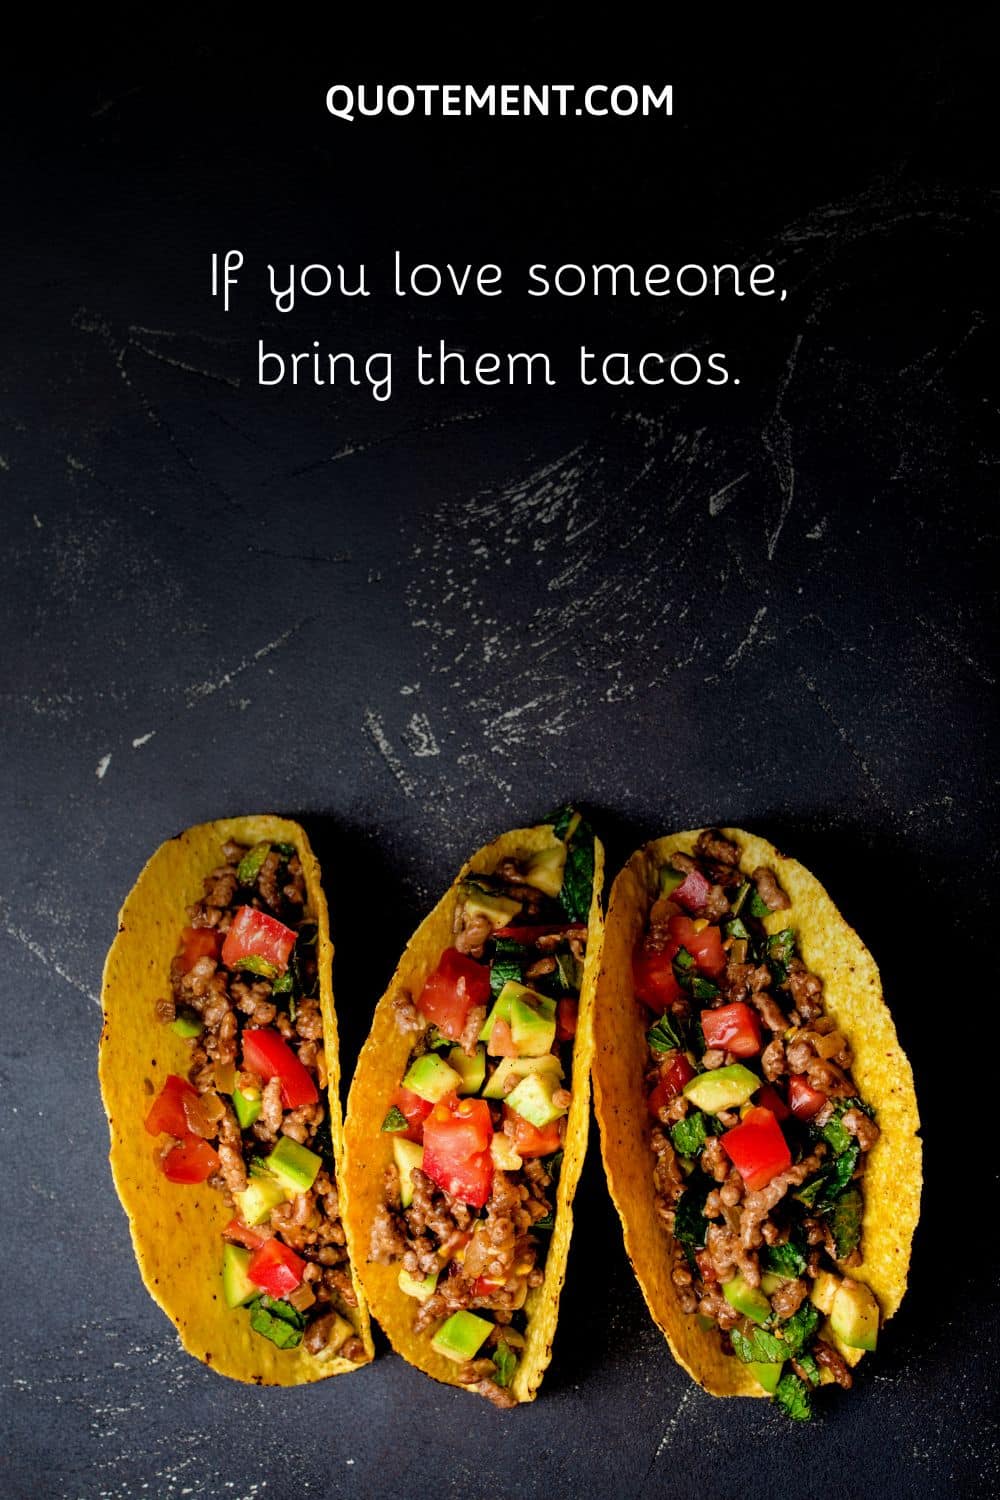 If you love someone, bring them tacos